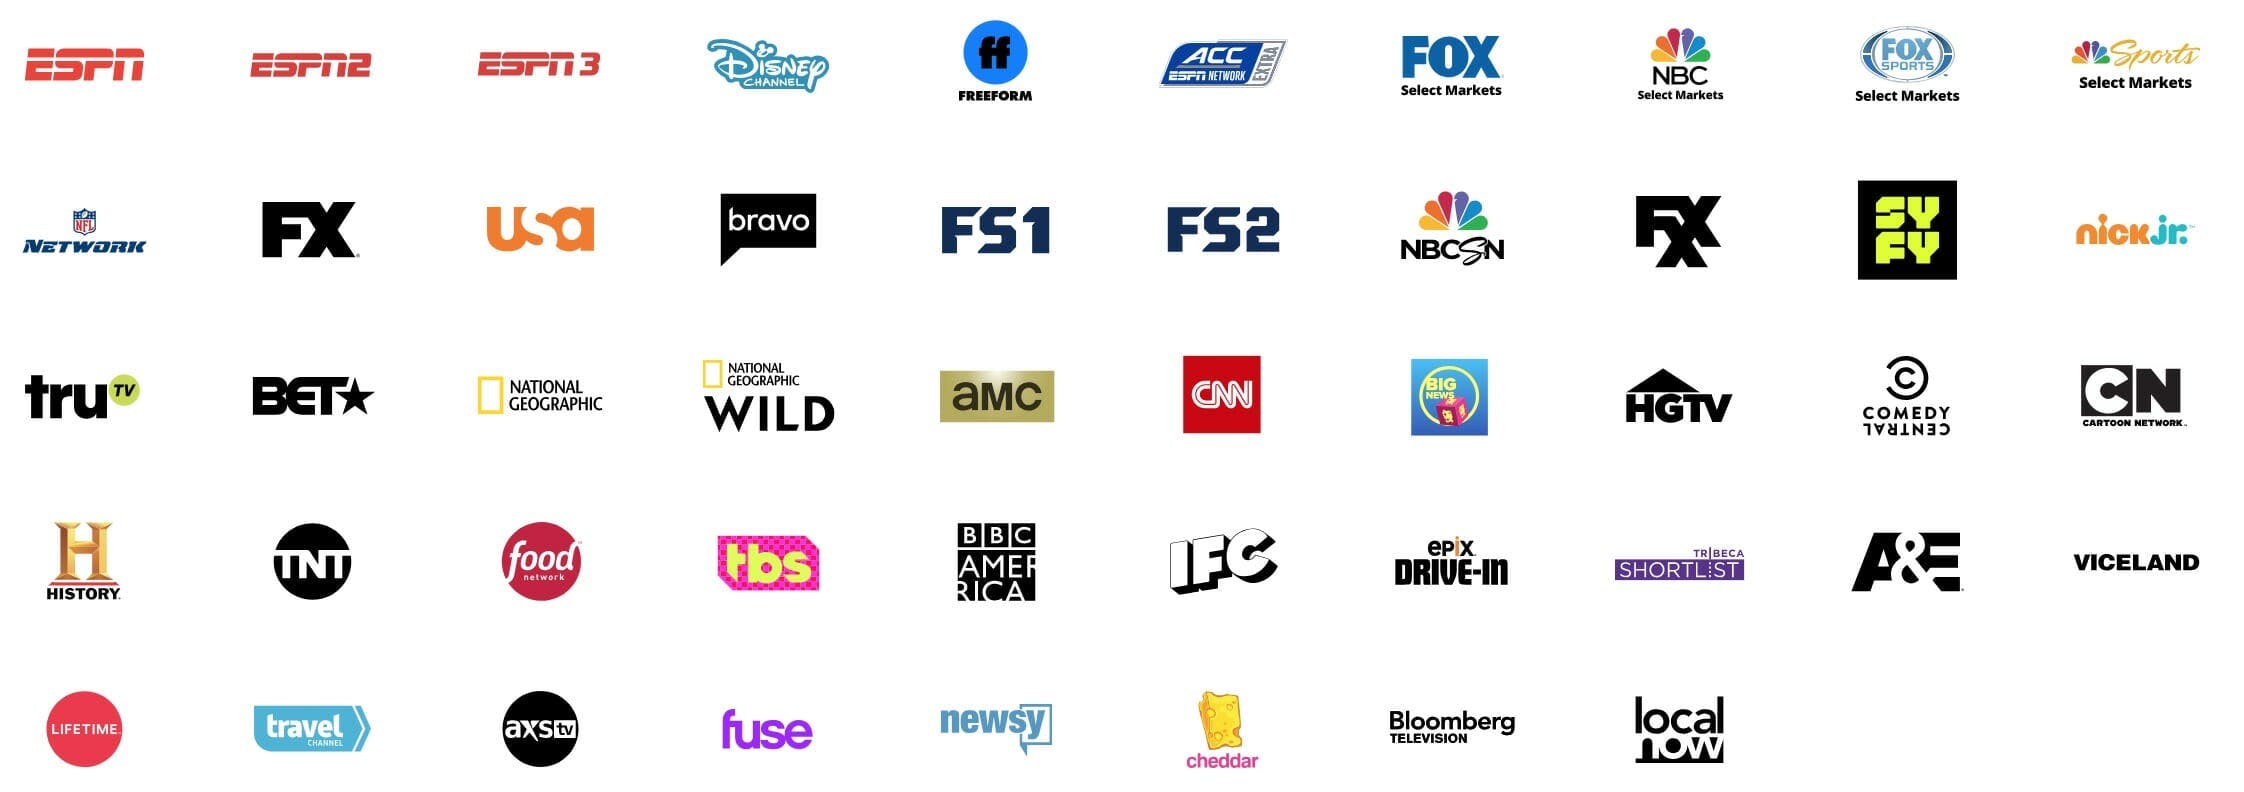 cord cutting guide 2019 sports sling tv